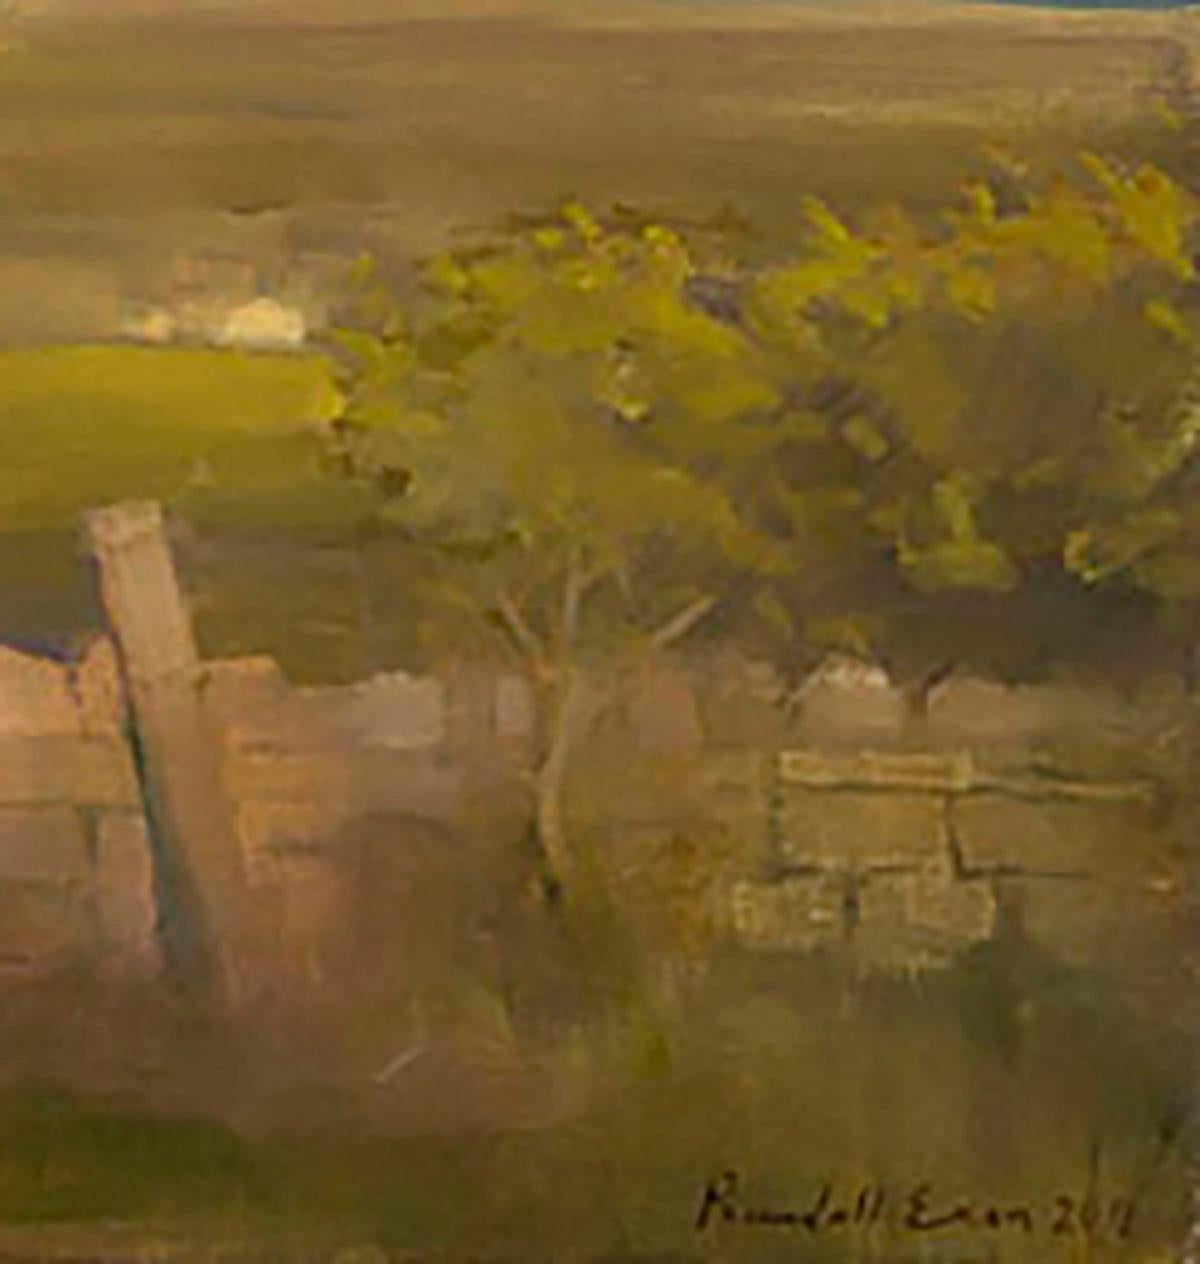 Full Moon over Jack's Pasture - Painting by Randall Exon